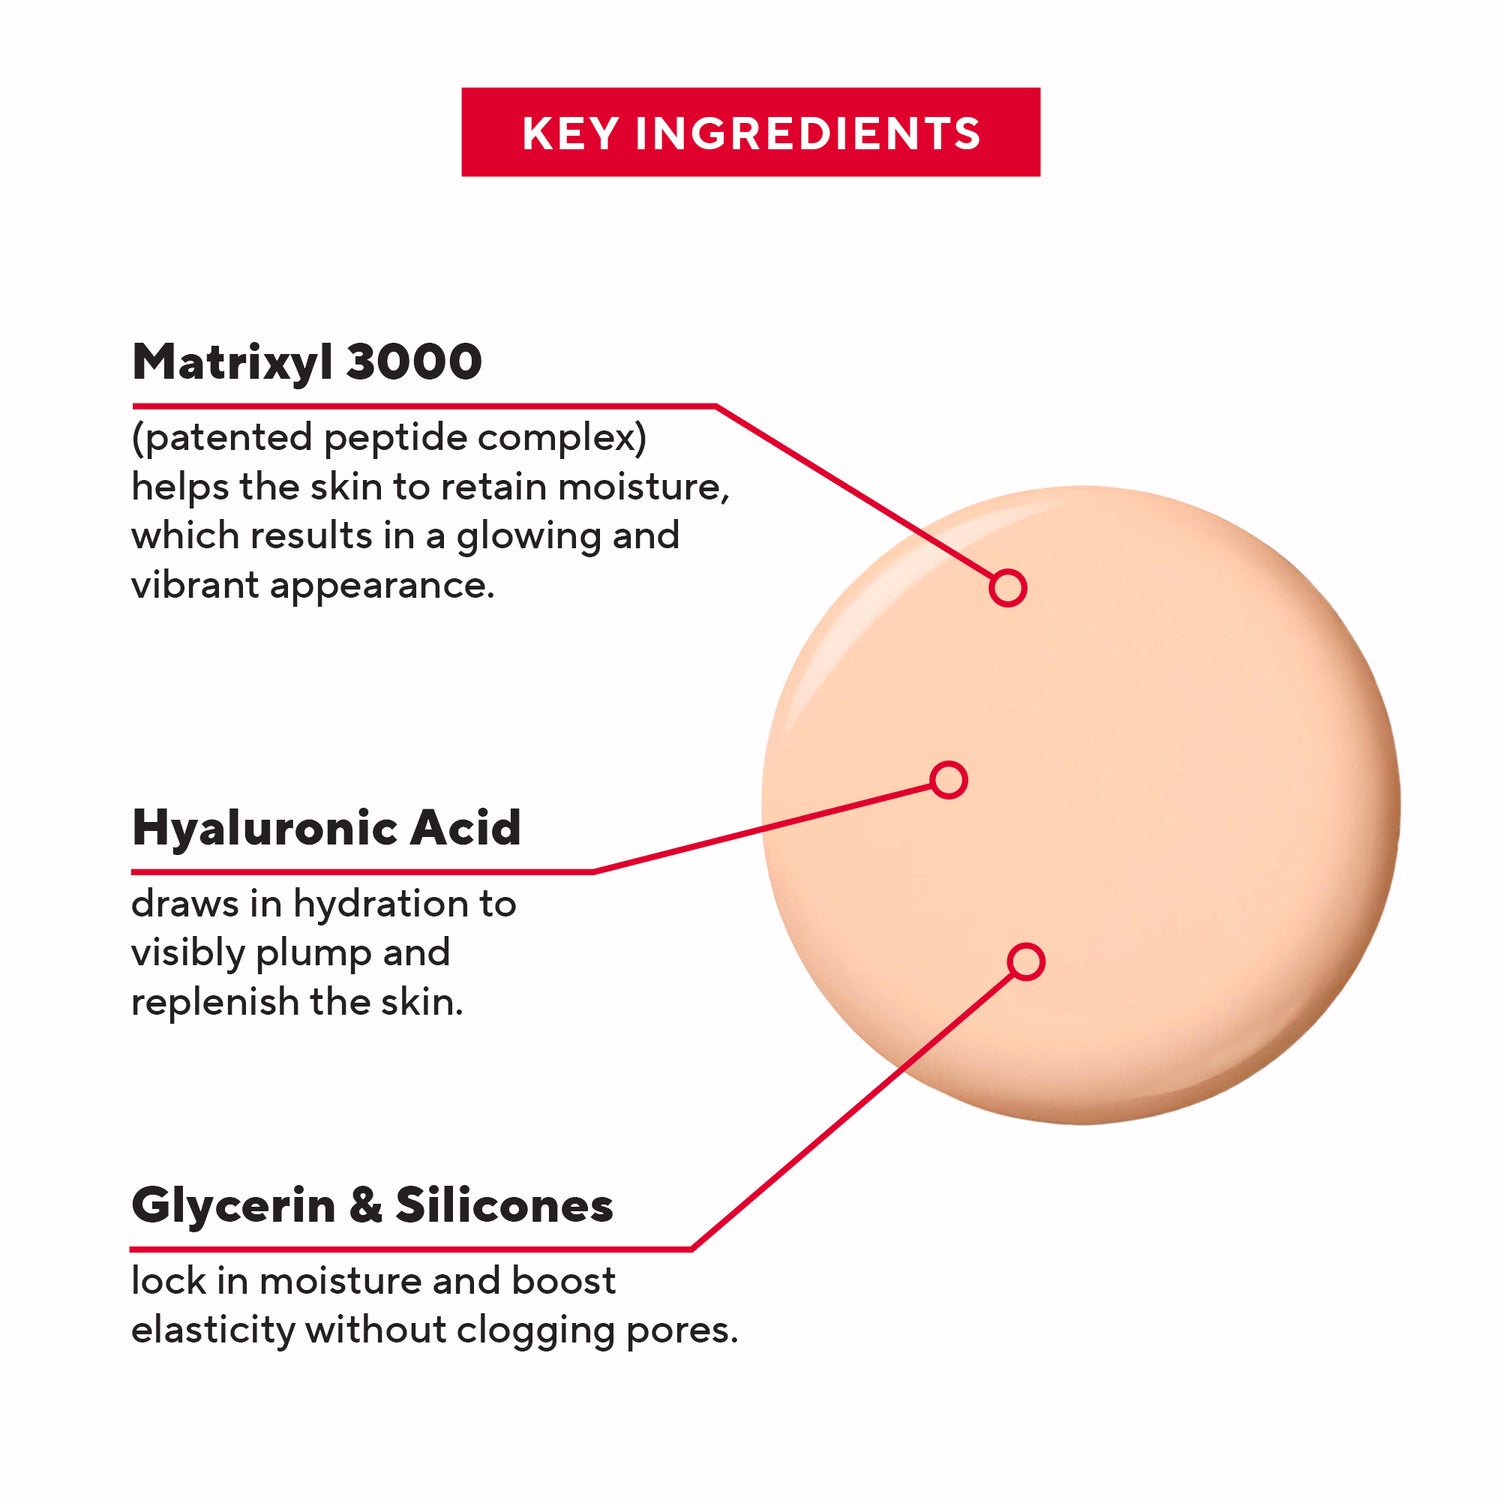 Mirabella Beauty - Invincible for all anti aging foundation key ingredients